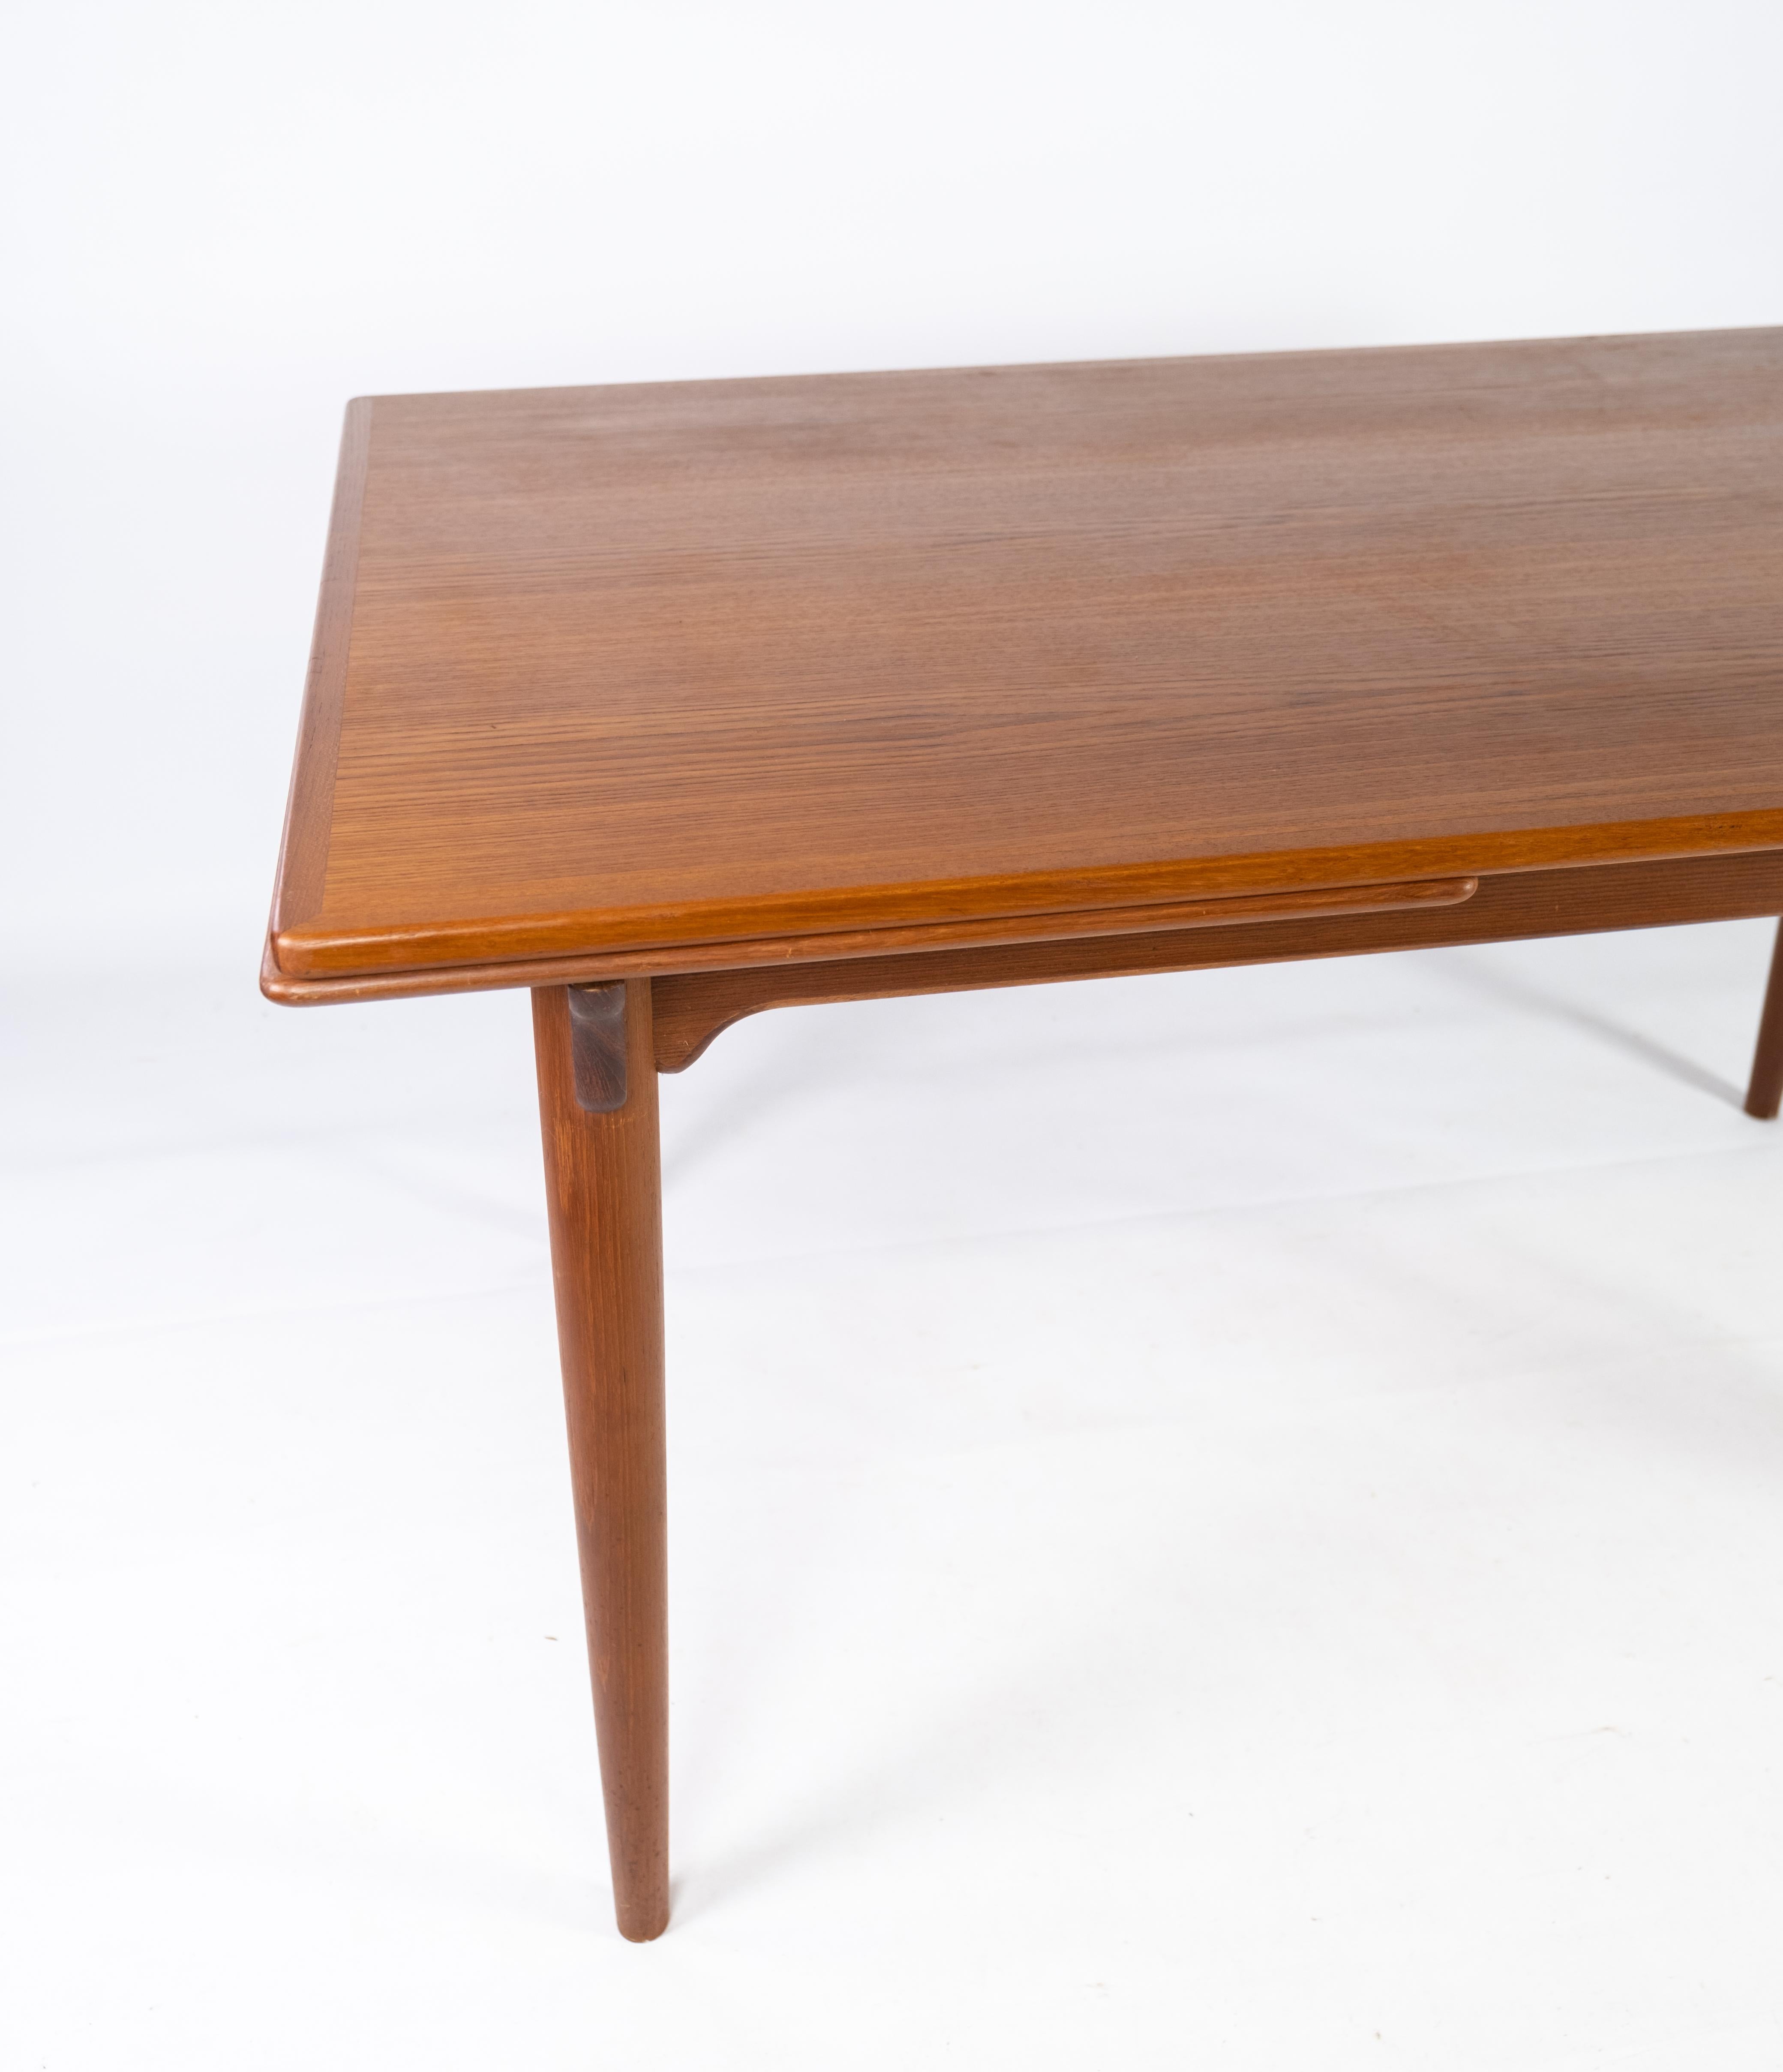 This teak dining table embodies the essence of Danish design from the 1960s, characterized by its sleek lines, functional versatility, and impeccable craftsmanship. Crafted from teak, a favored material for Danish furniture makers of the era, this